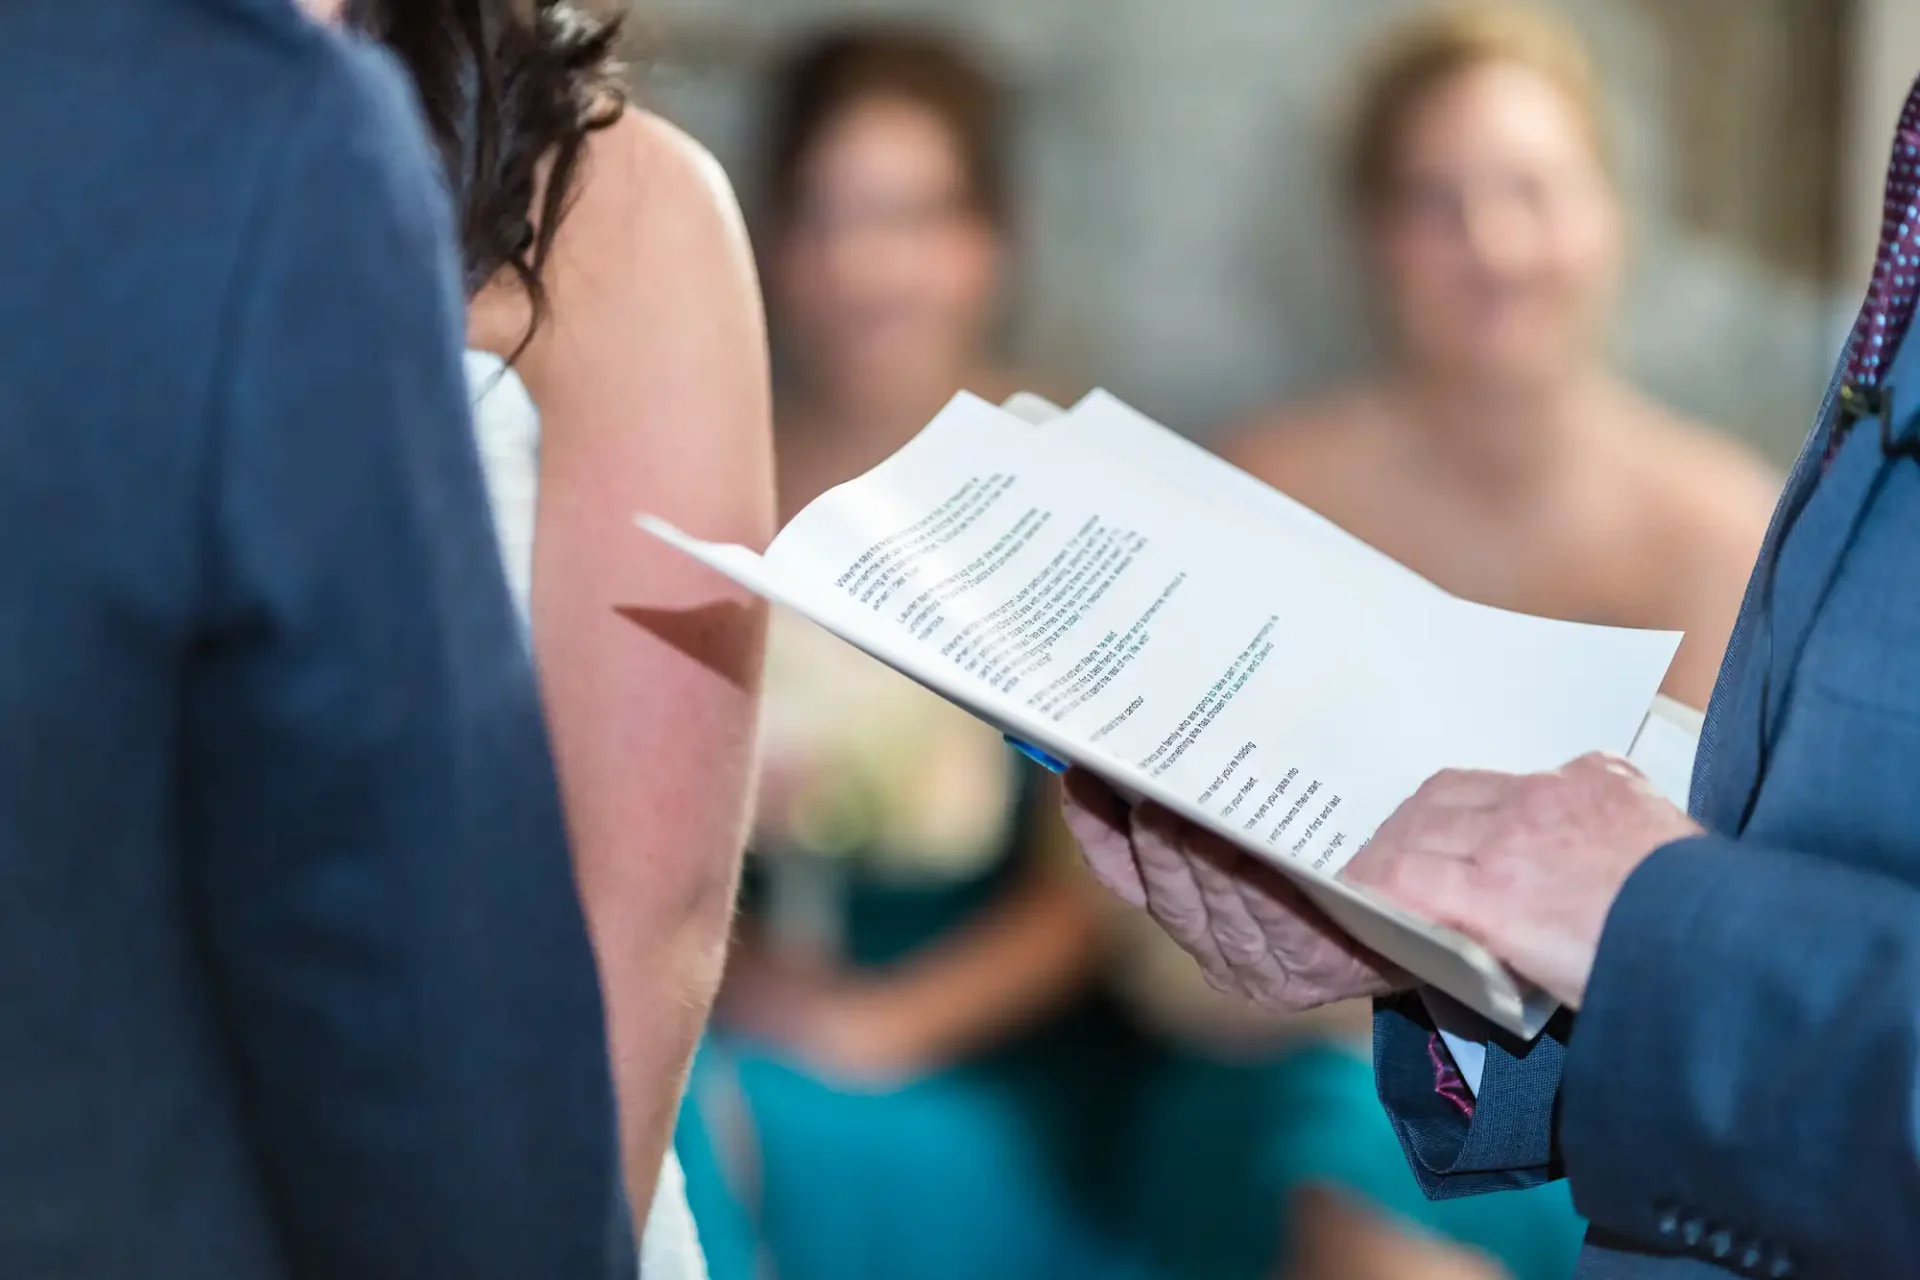 A close-up of a wedding vow sheet held by a groom in front of a bride, with bridesmaids slightly blurred in the background.